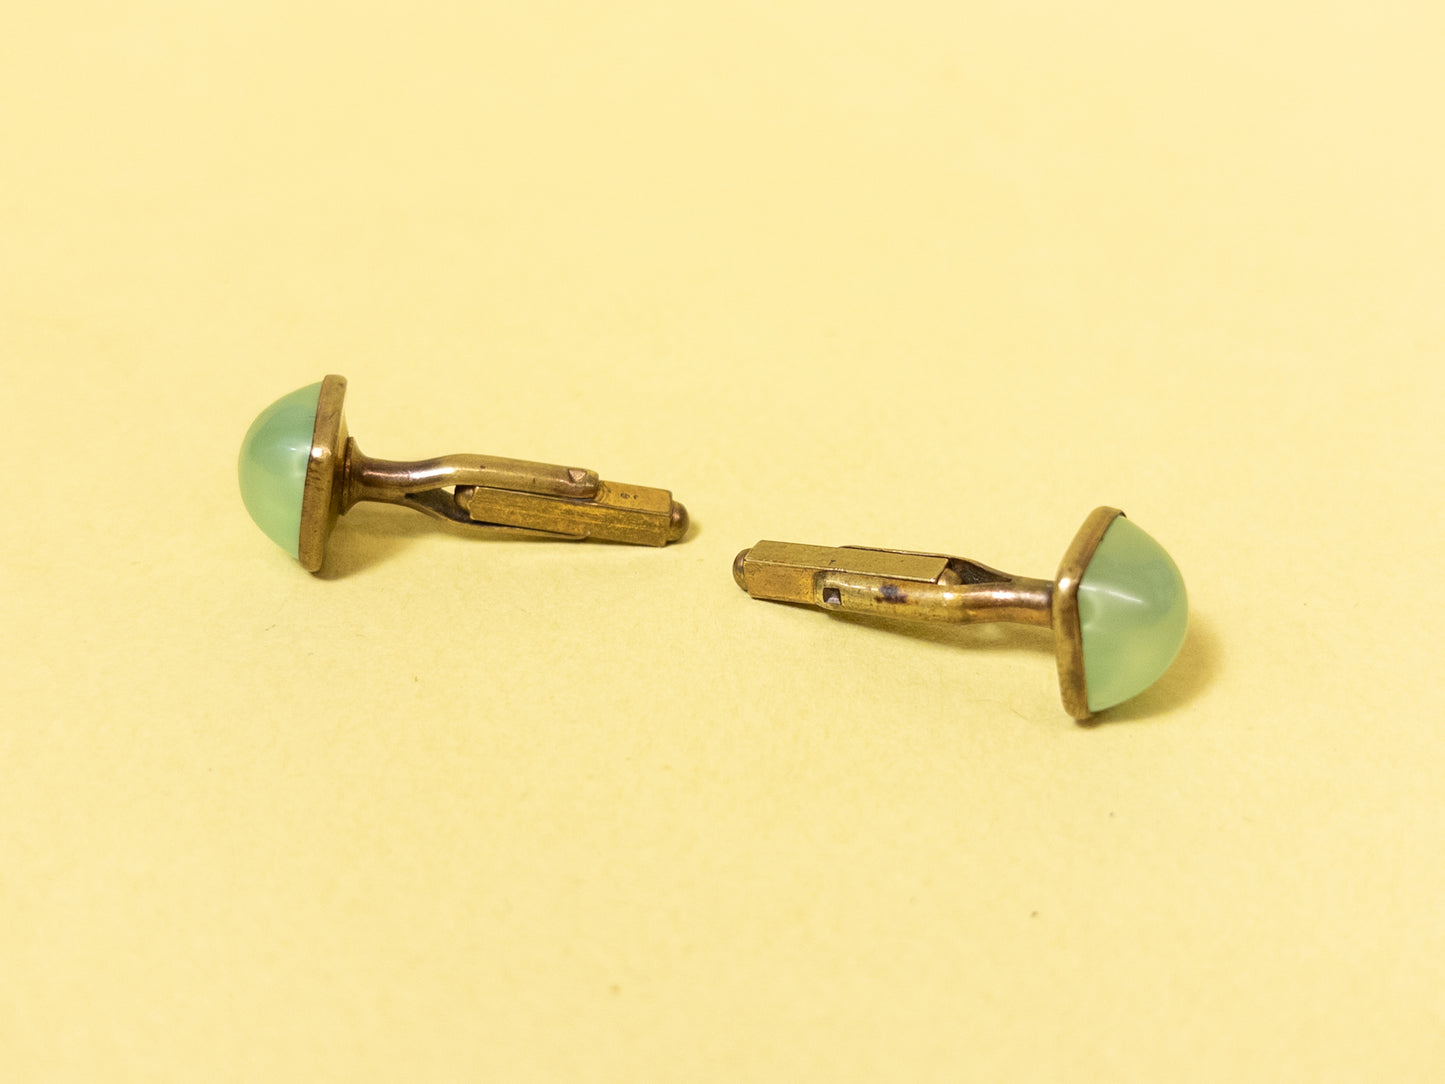 50's 60's Frosted Green & Gold Tone Cufflinks